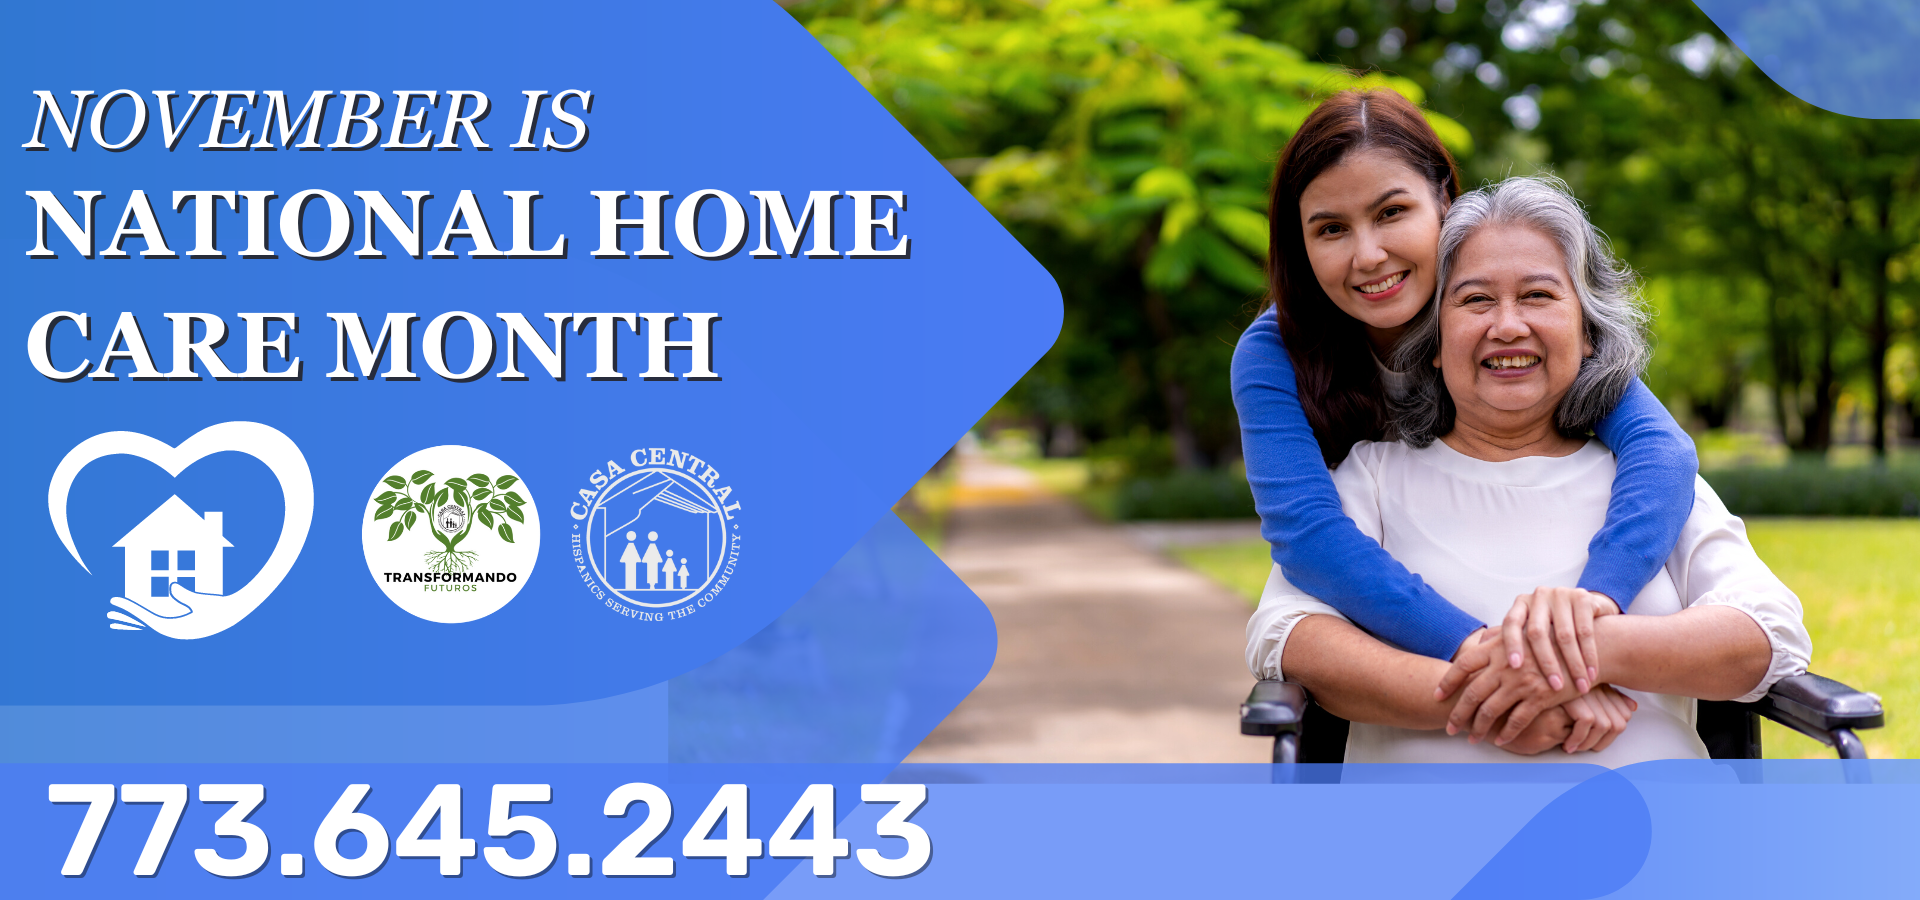 Home Care Month